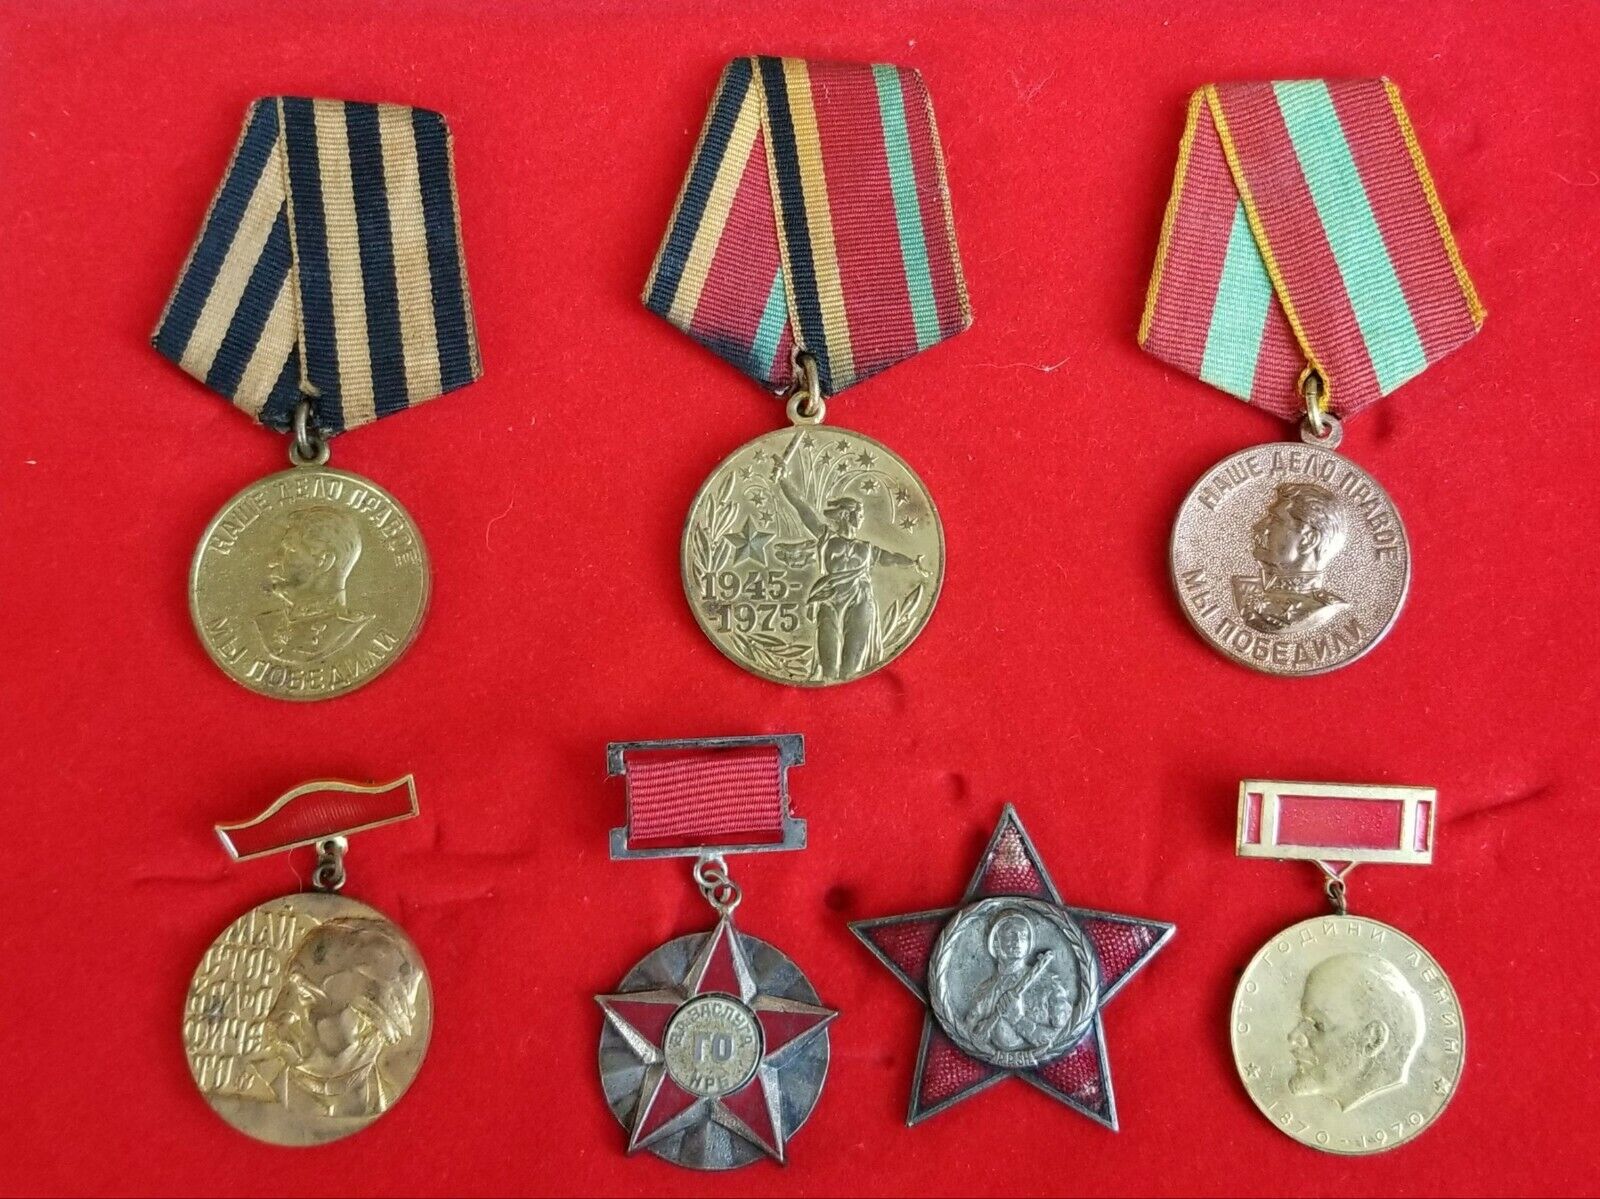 7 PIECE GROUPING: WW II? RUSSIAN MILITARY CAMPAIGN/SERVICE? MEDALS- NICE/L@@K